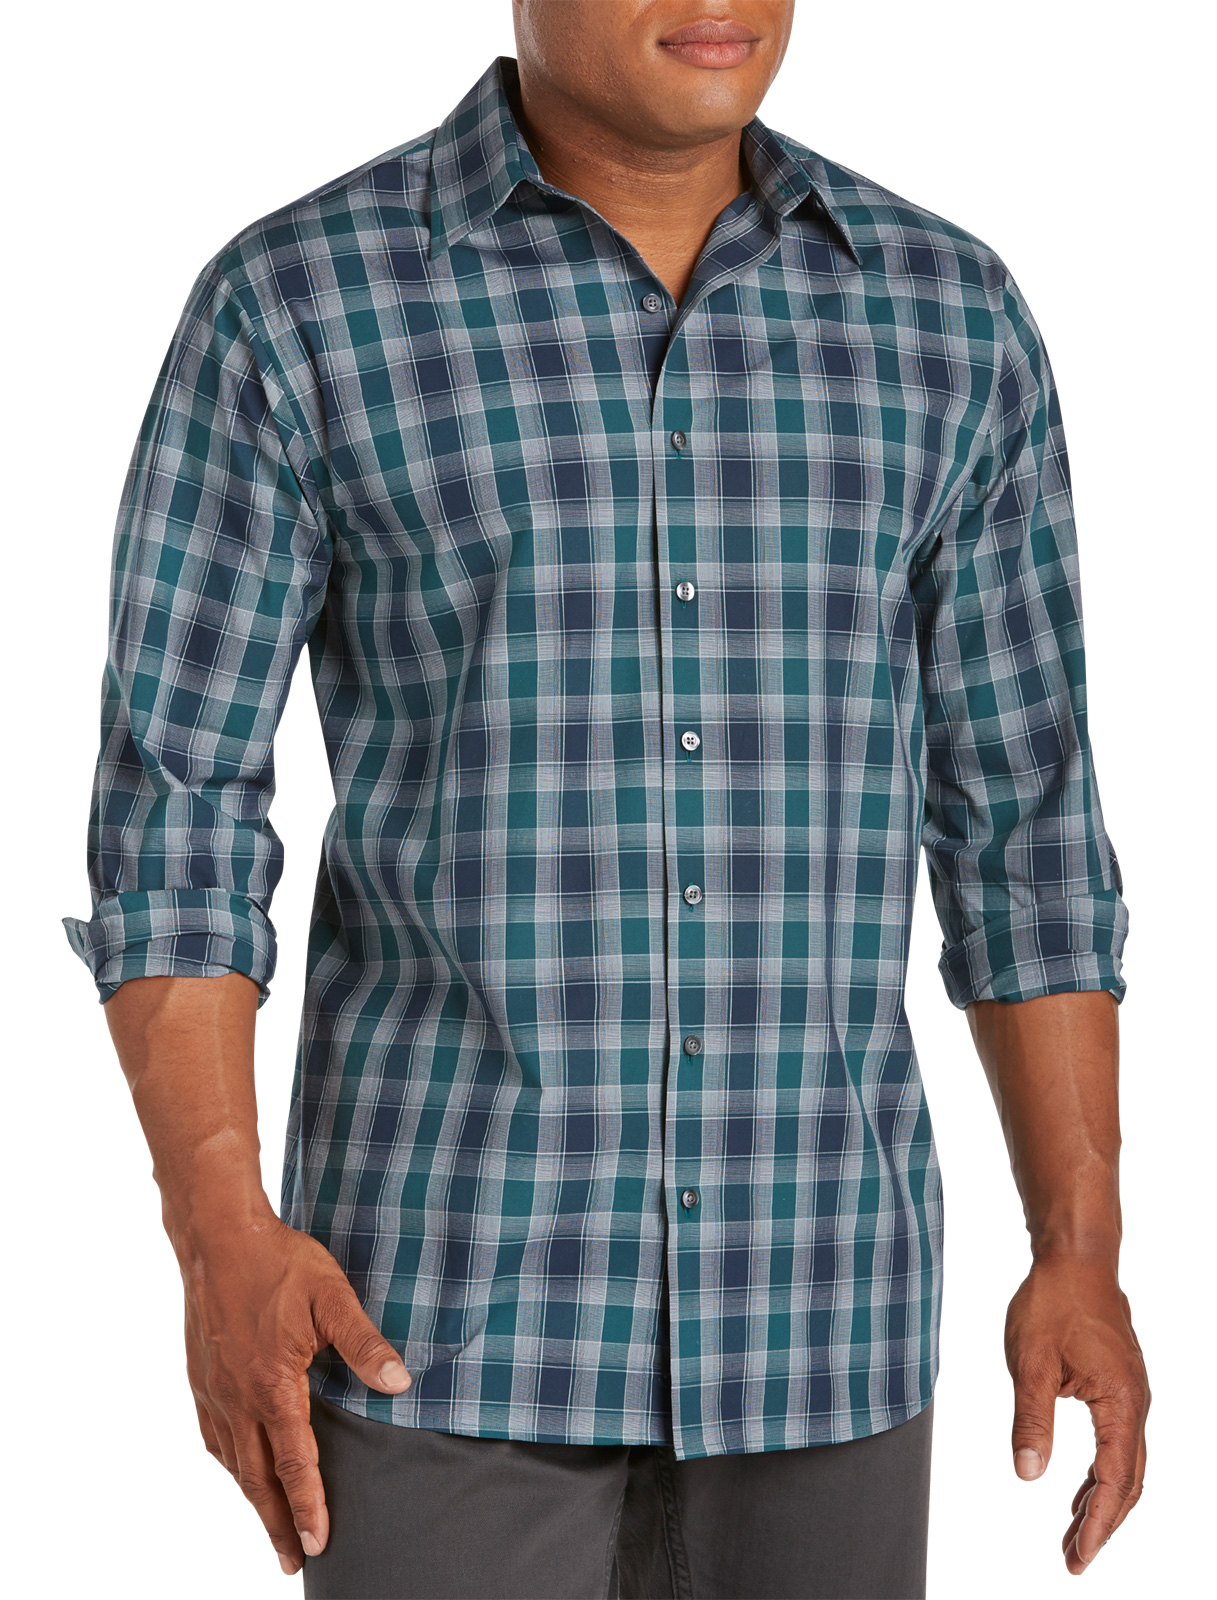 Synrgy Men's Big and Tall Textured Check Sport Shirt